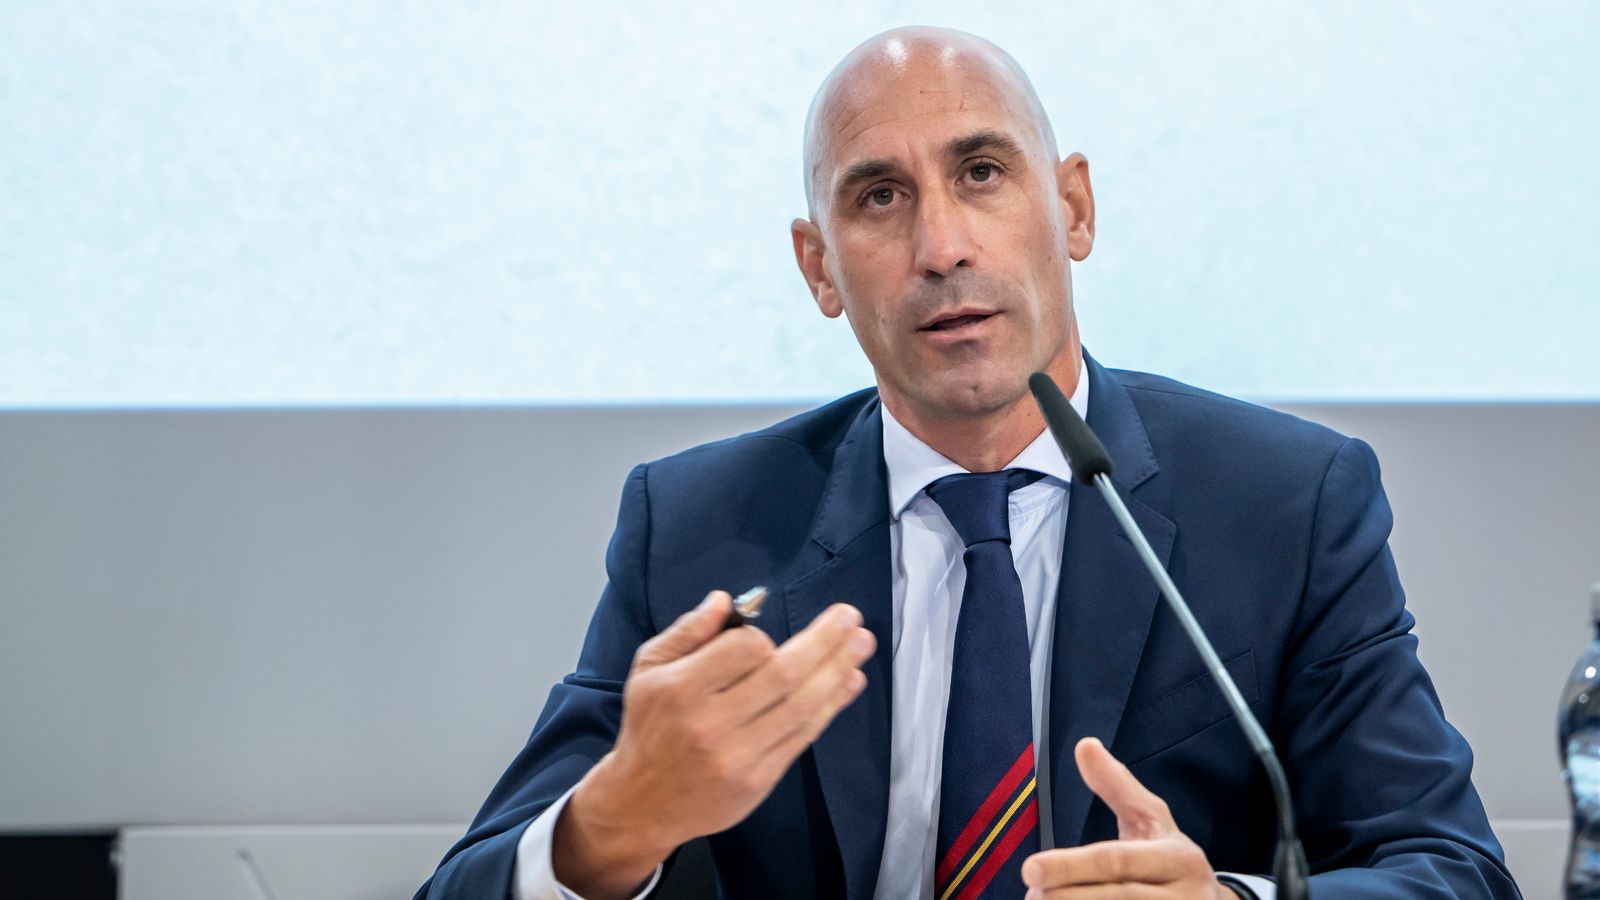 Luis Rubiales to appear in court over kiss scandal